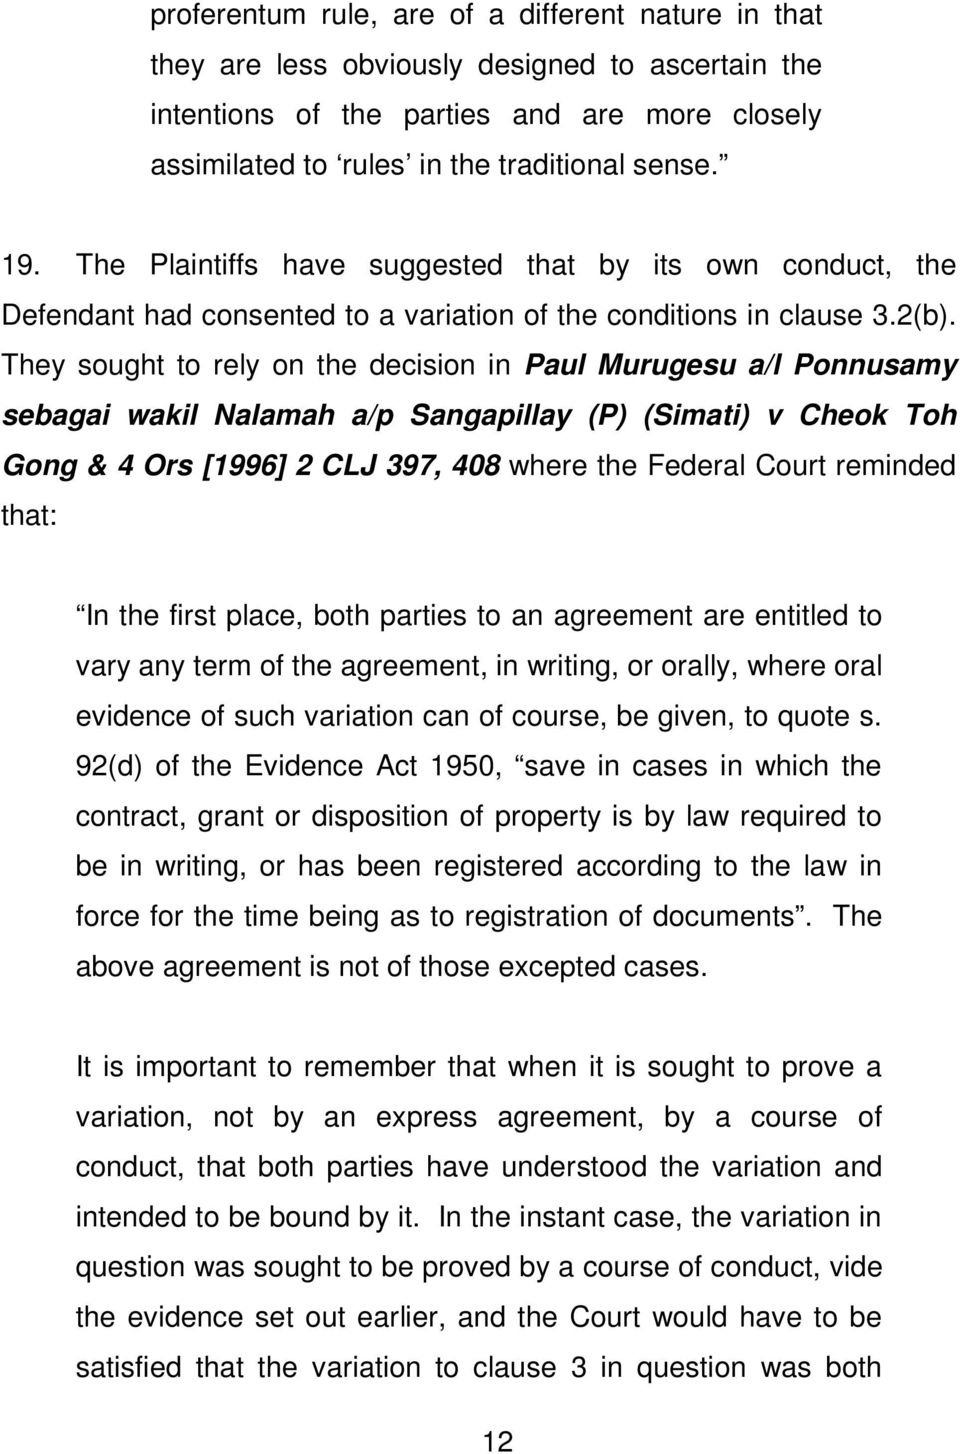 They sought to rely on the decision in Paul Murugesu a/l Ponnusamy sebagai wakil Nalamah a/p Sangapillay (P) (Simati) v Cheok Toh Gong & 4 Ors [1996] 2 CLJ 397, 408 where the Federal Court reminded